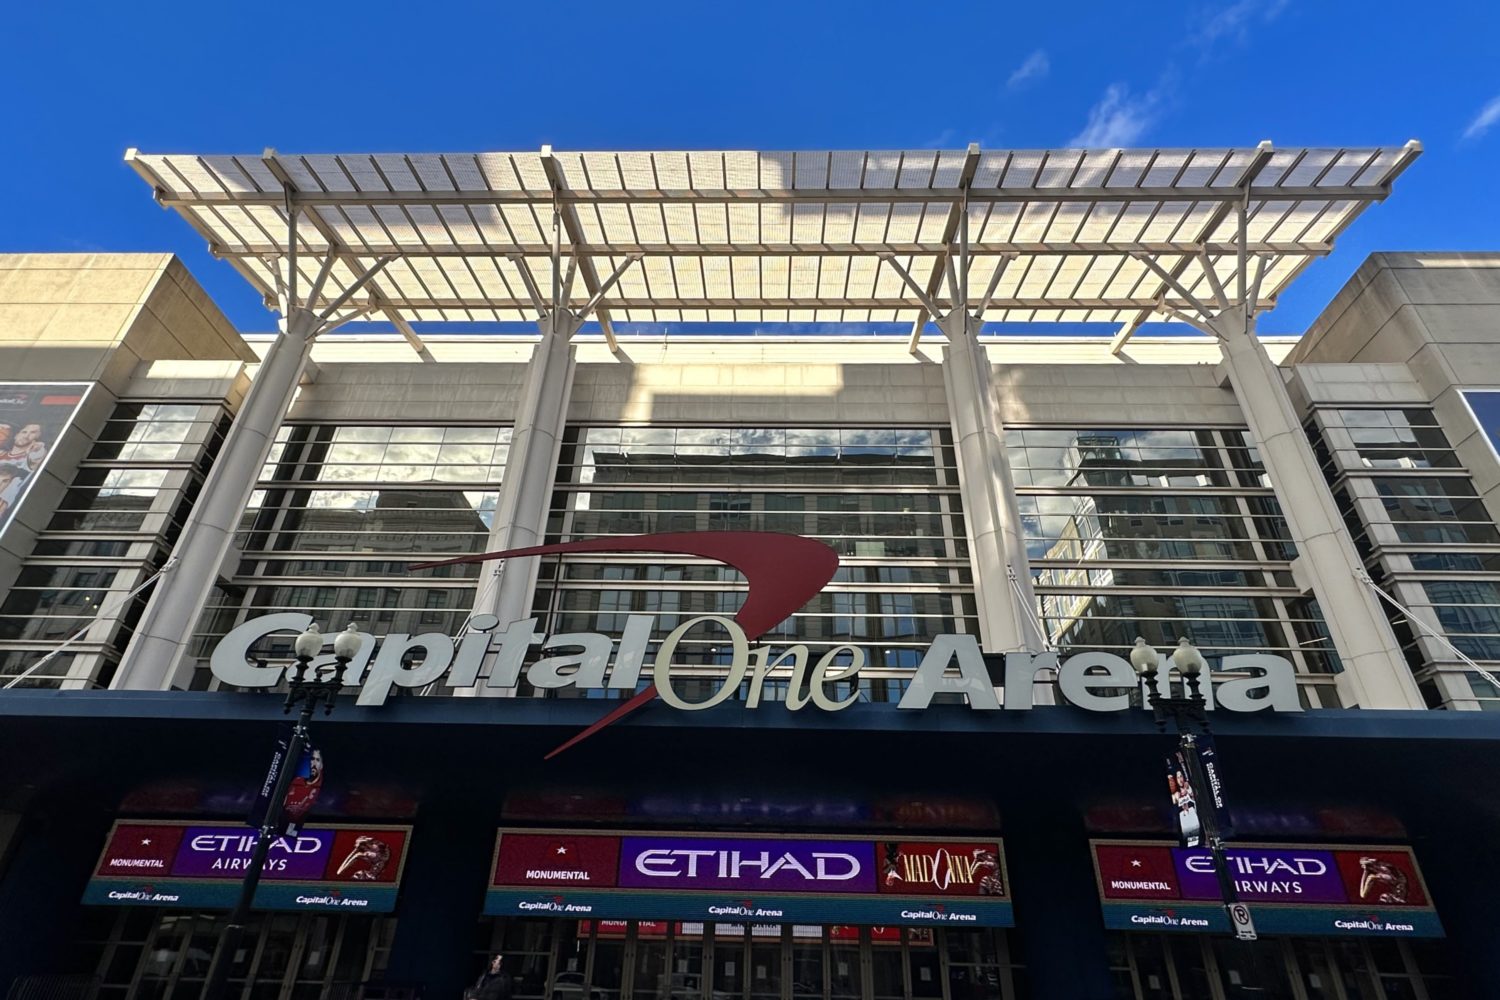 Gallery Place/ Capital One Arena